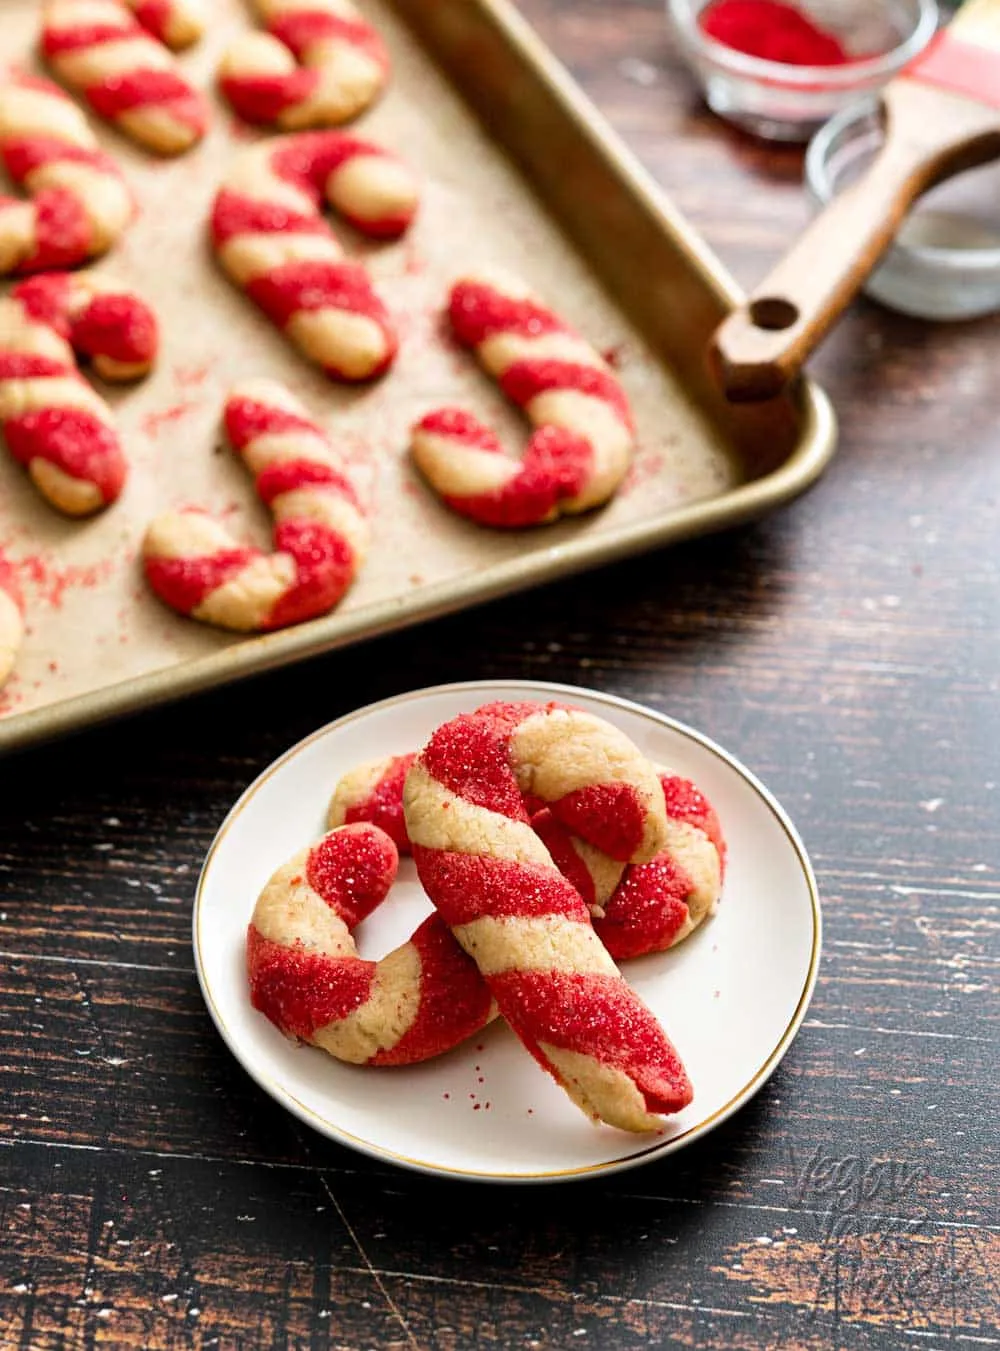 Candy cane-shaped cookies on a baking sheet next to colored sugar and pastry brush